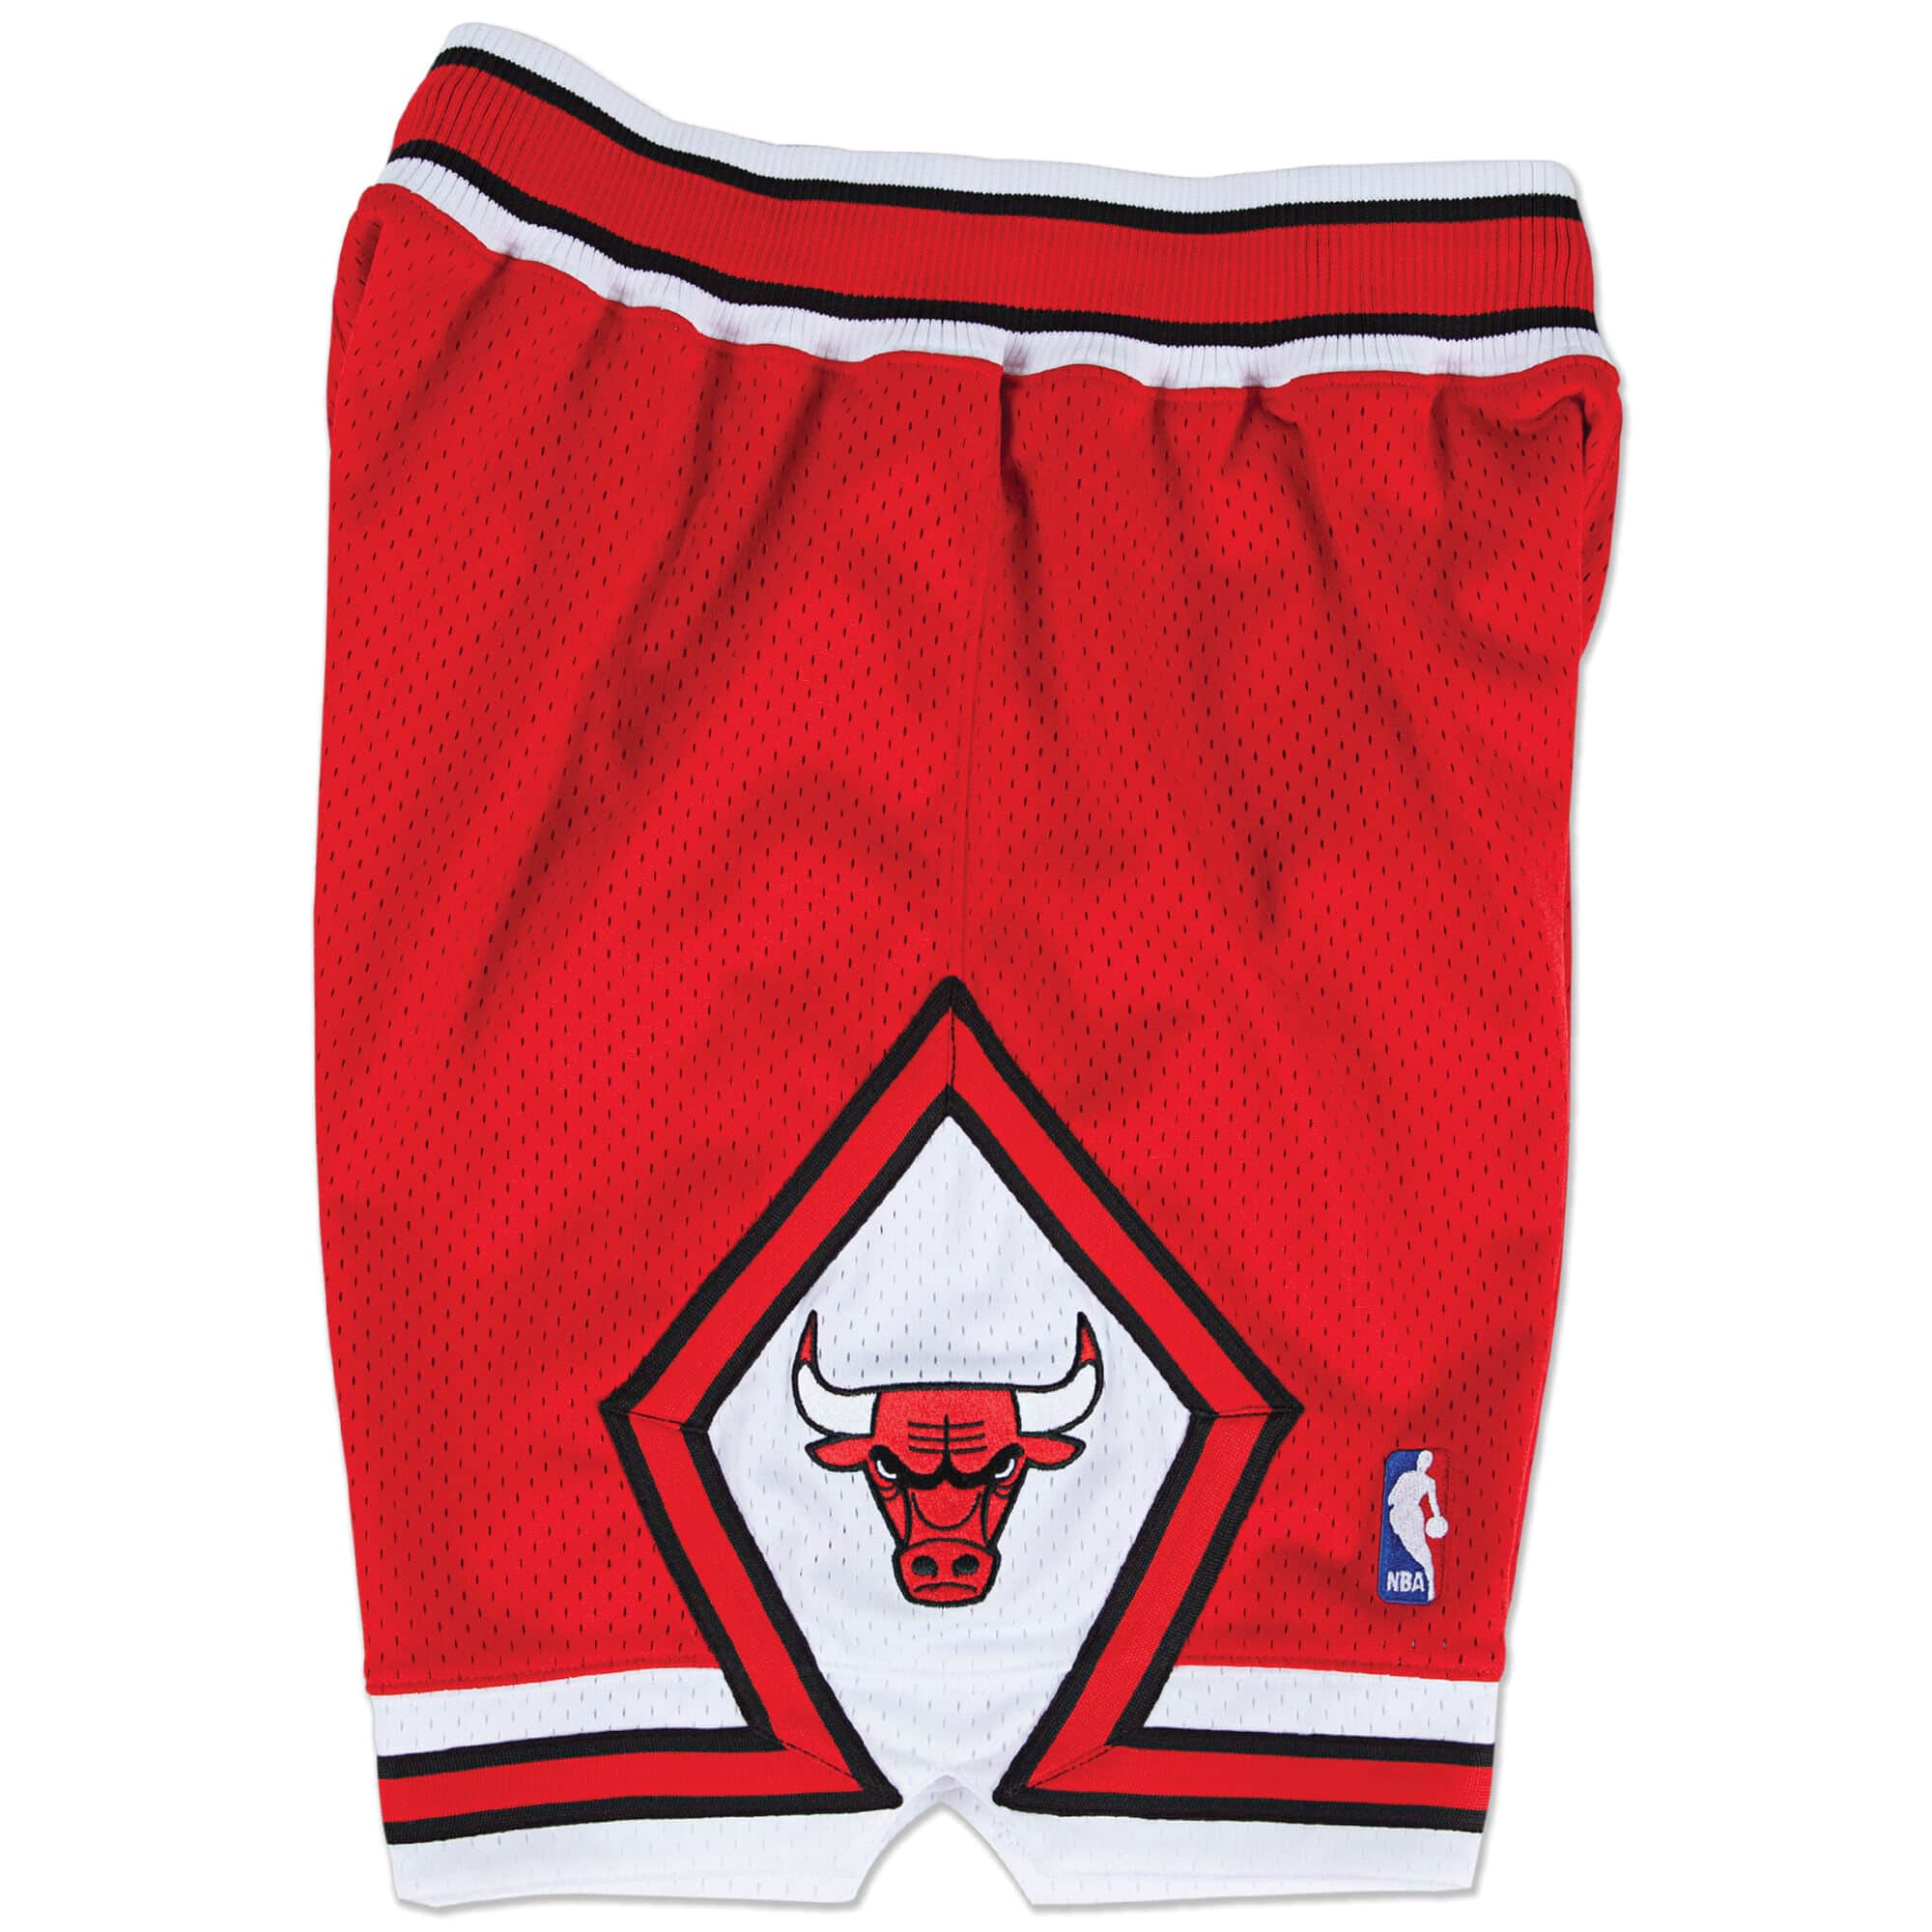 Mitchell and Ness NBA Authentic 1997-98 Chicago Bulls Shorts Size